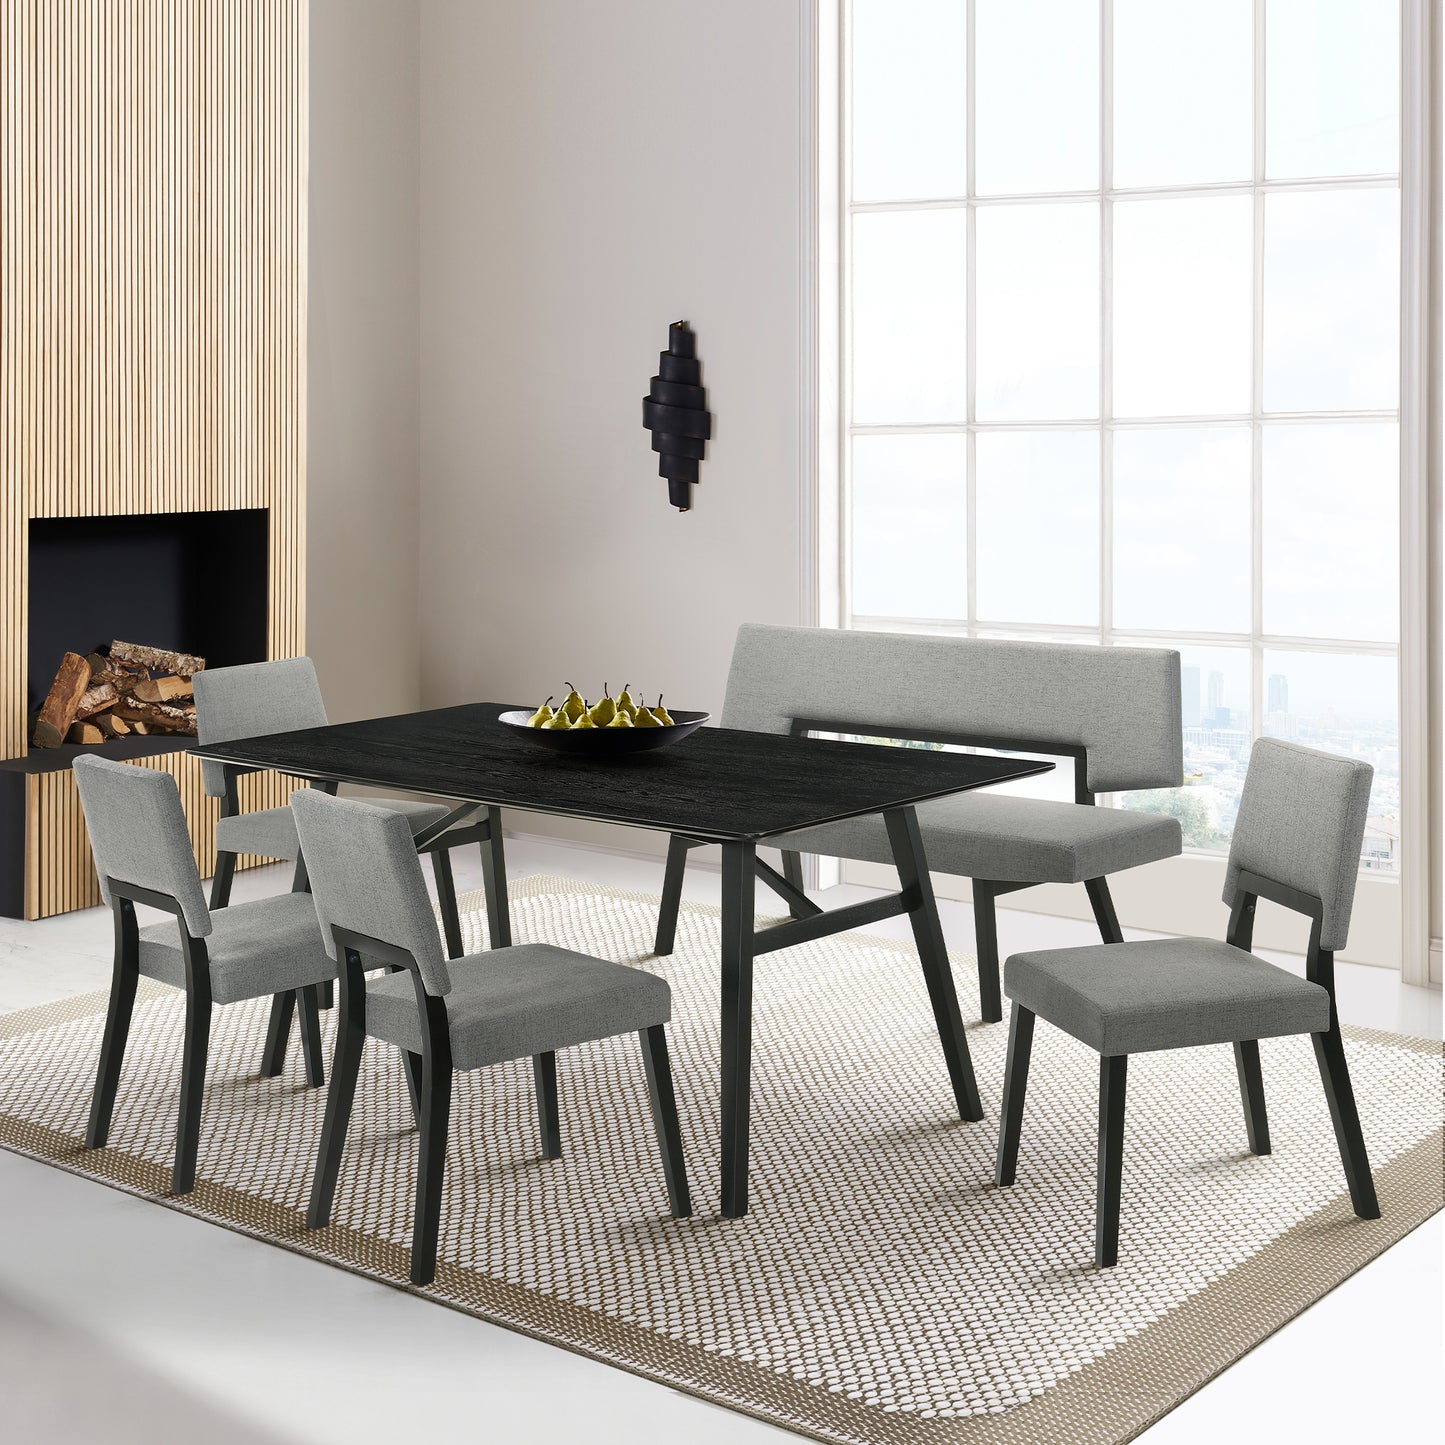 Channell 6 Piece Black Wood Dining Table Set with Bench in Charcoal Fabric